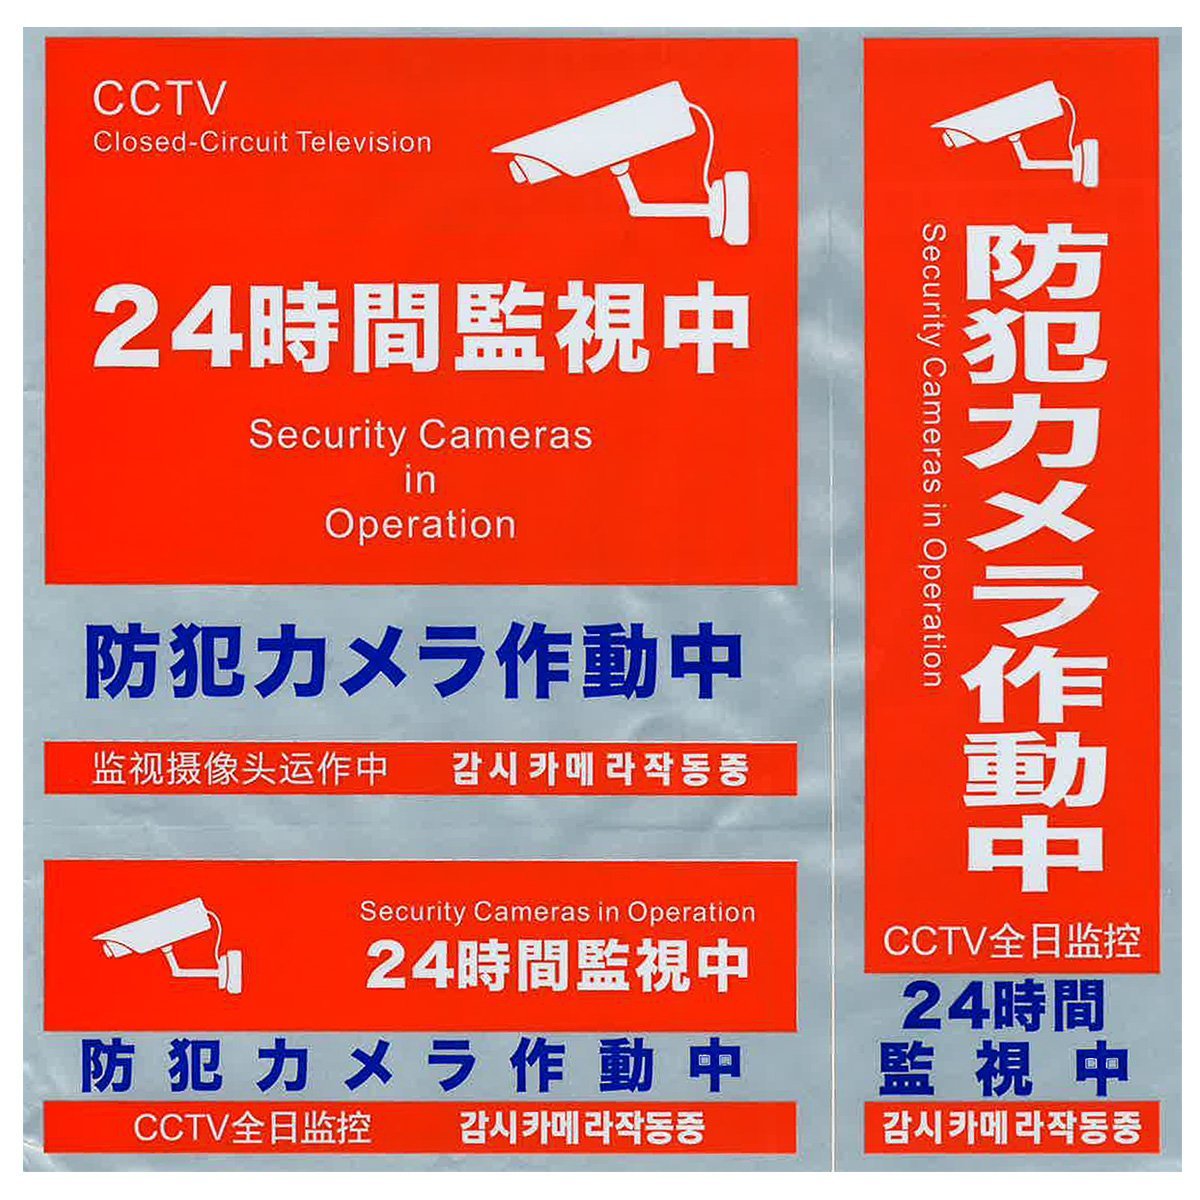  dummy security camera fake equipment red LED blinking IR camera type dummy camera (Ⅱ) crime prevention sticker 2 kind attaching /22